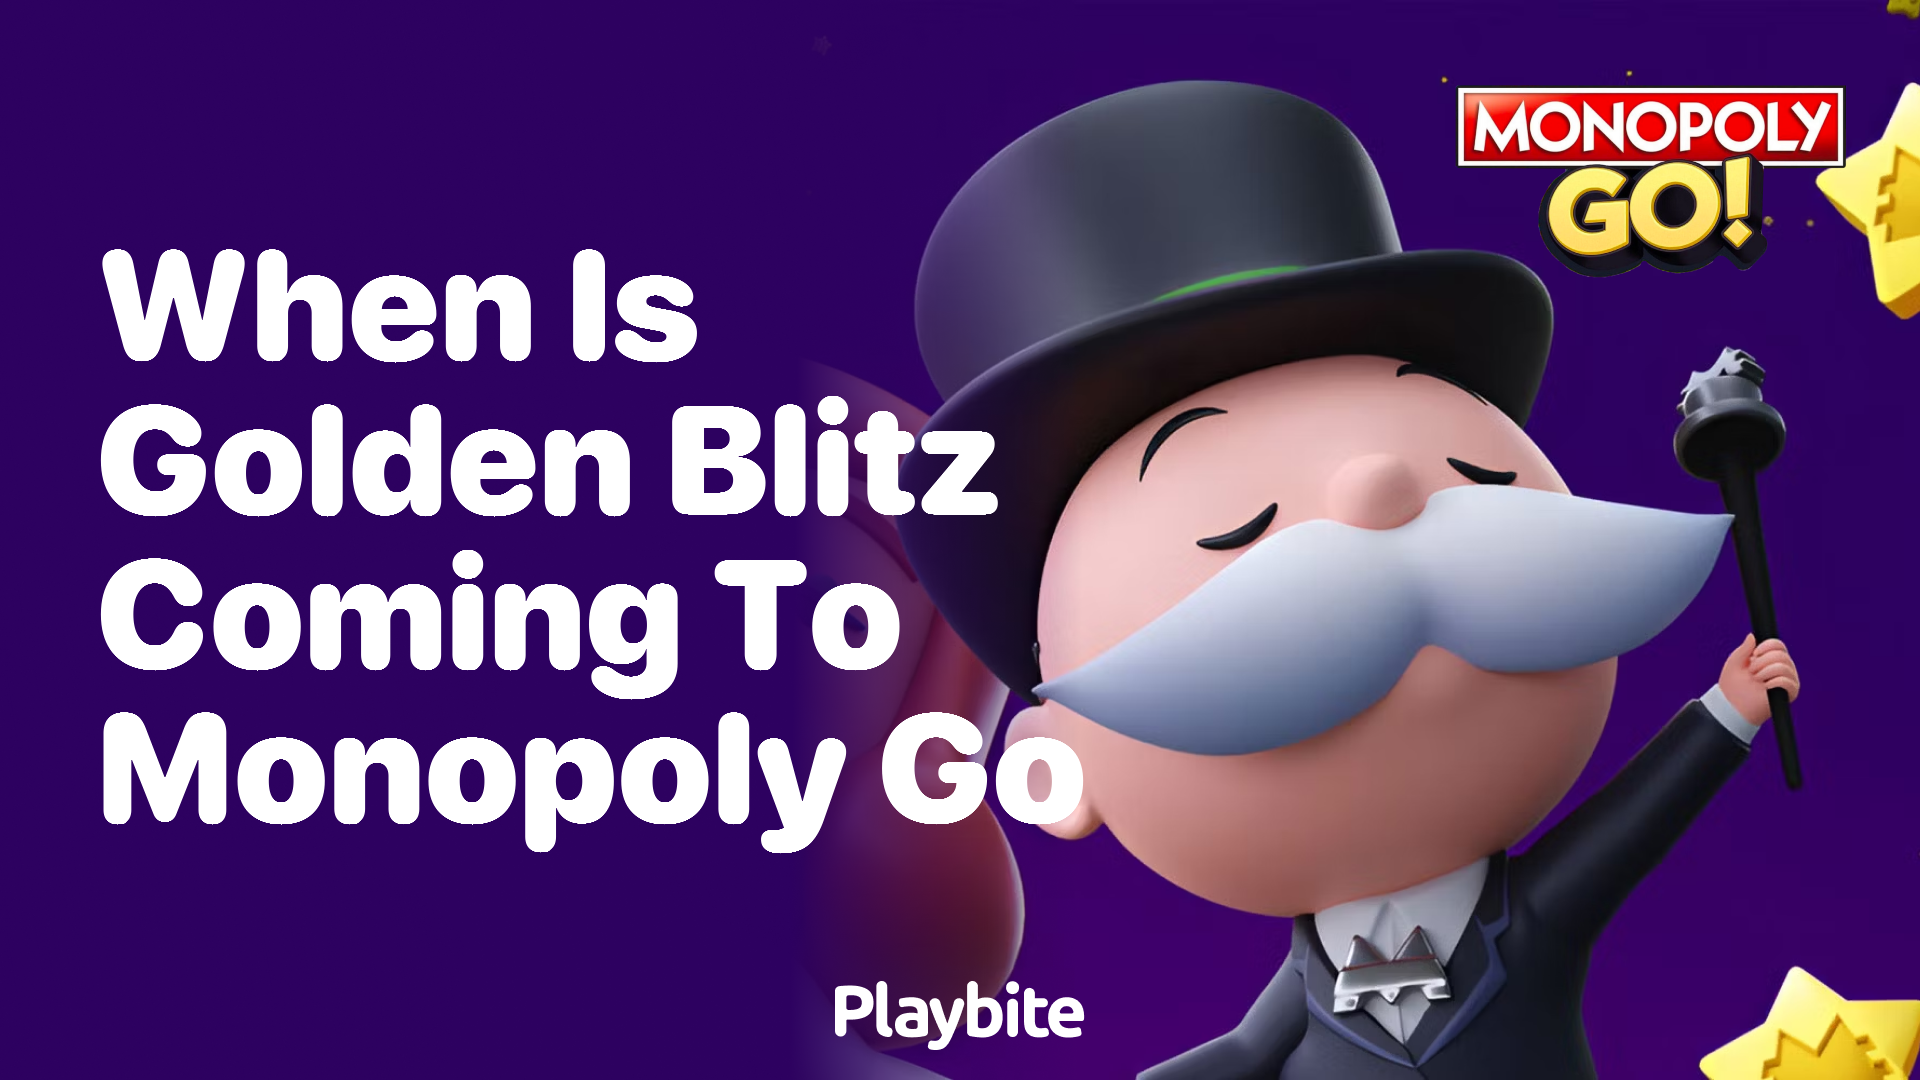 When is Golden Blitz Coming to Monopoly Go?